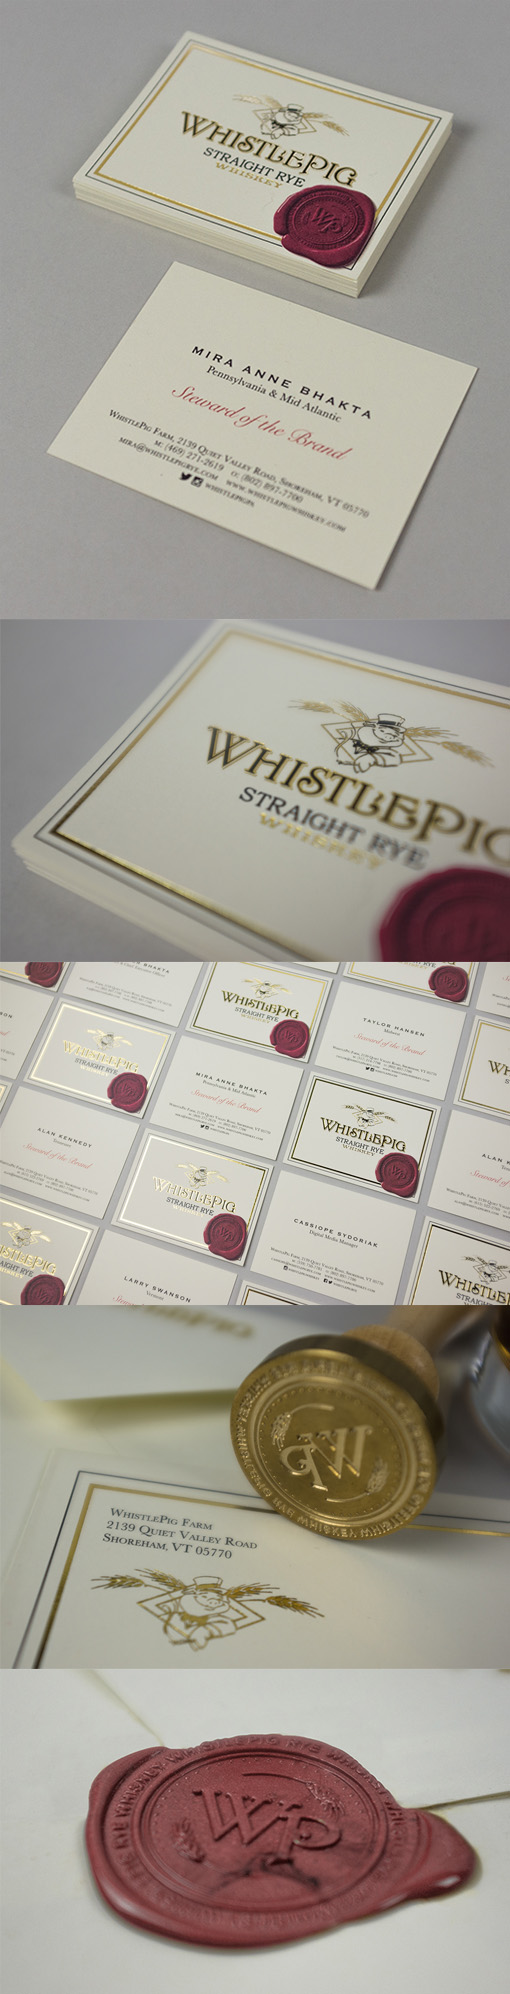 Custom Wax Seal On A Vintage Styled Business Card For A Whiskey Brand